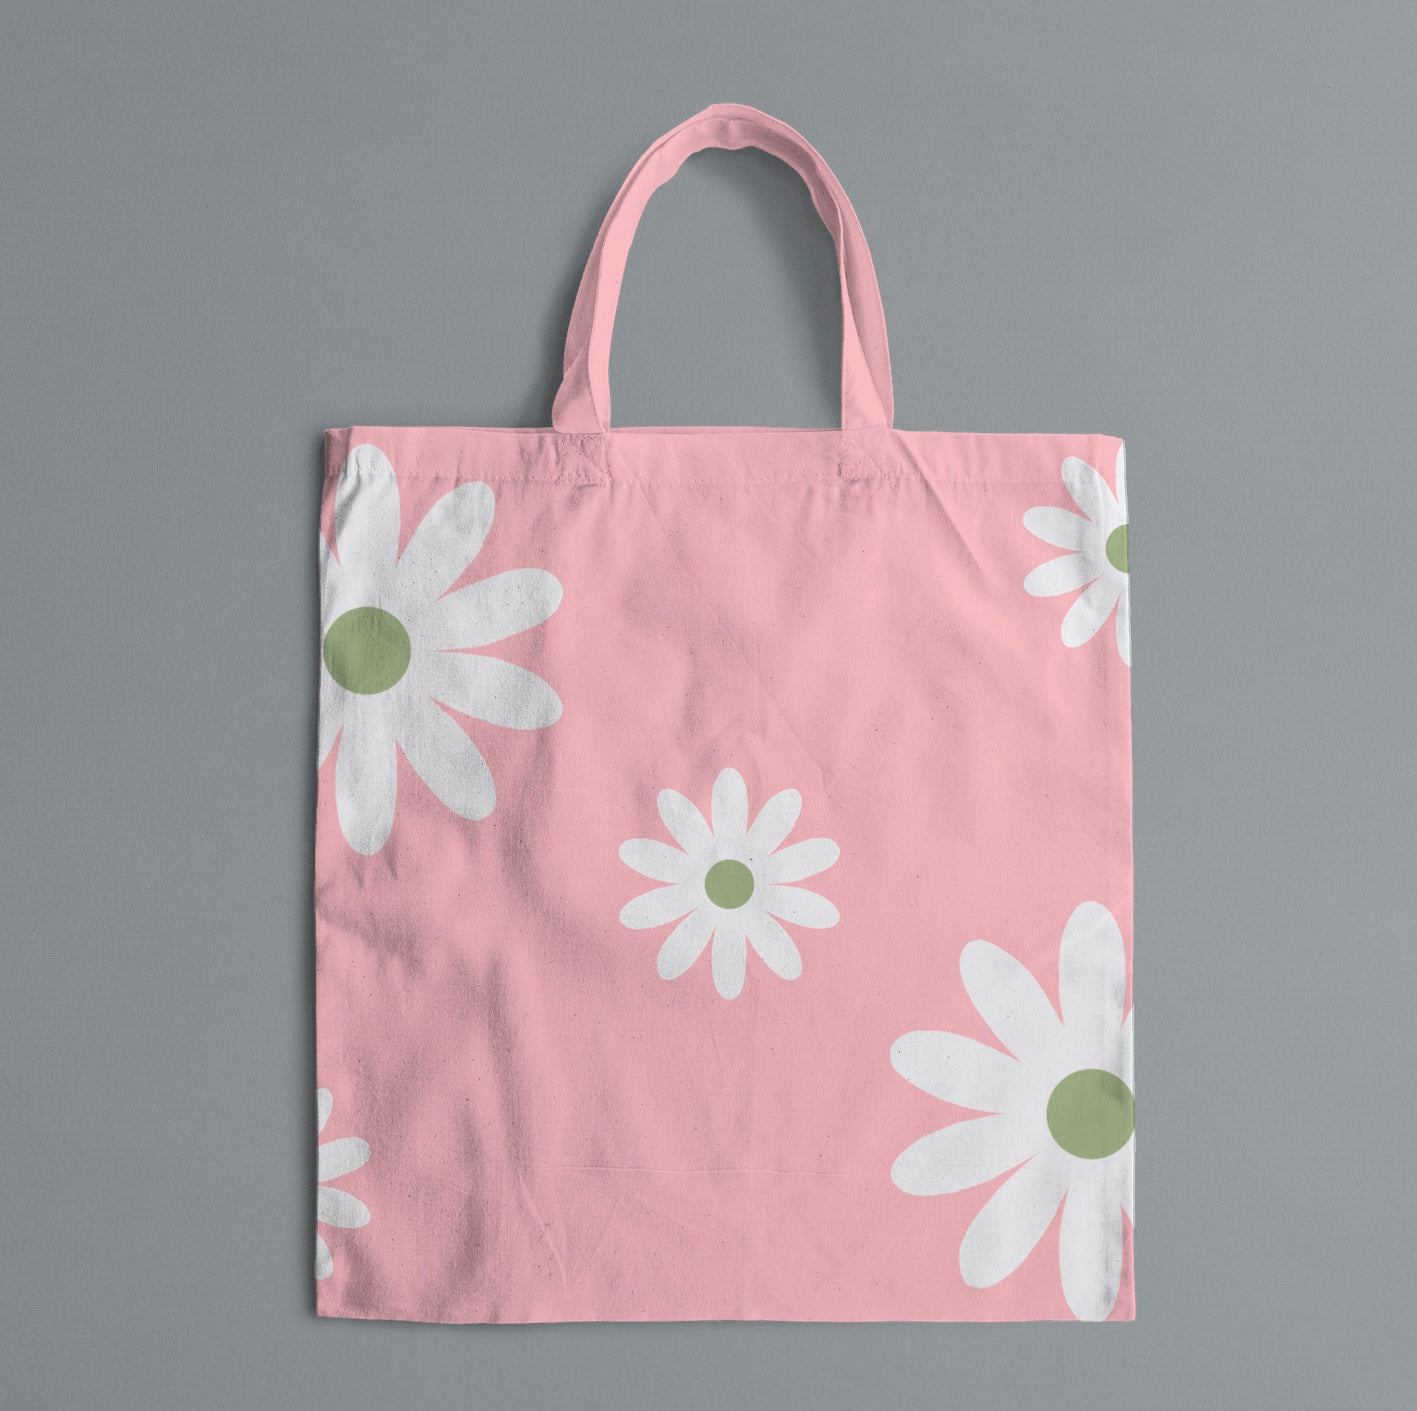 light pink tote bag with white flowers on gray background